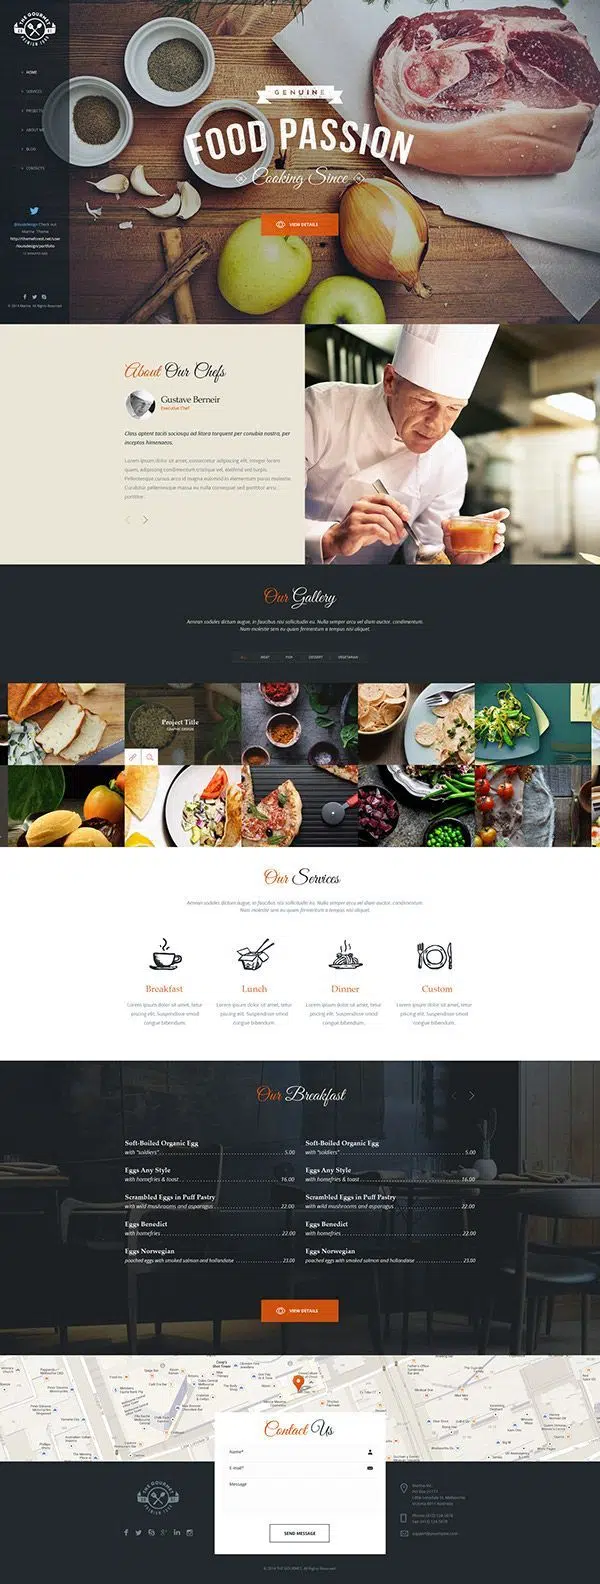 The Gourmet – Food WP Skin & Theme on